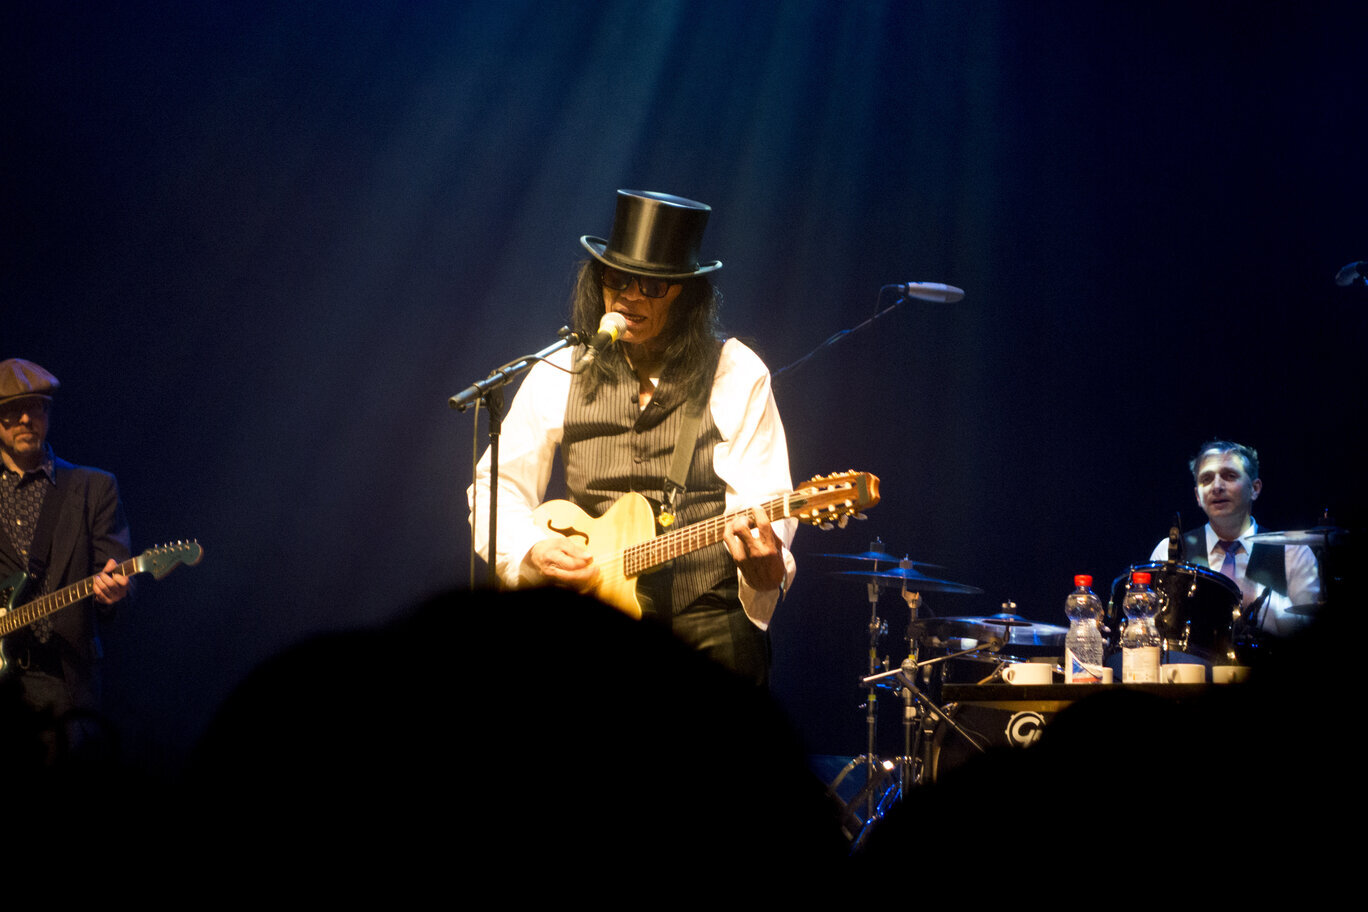 “Rodriguez Live in Zurich” by B0rder licensed under CC Attribution-Share Alike 3.0 Unported